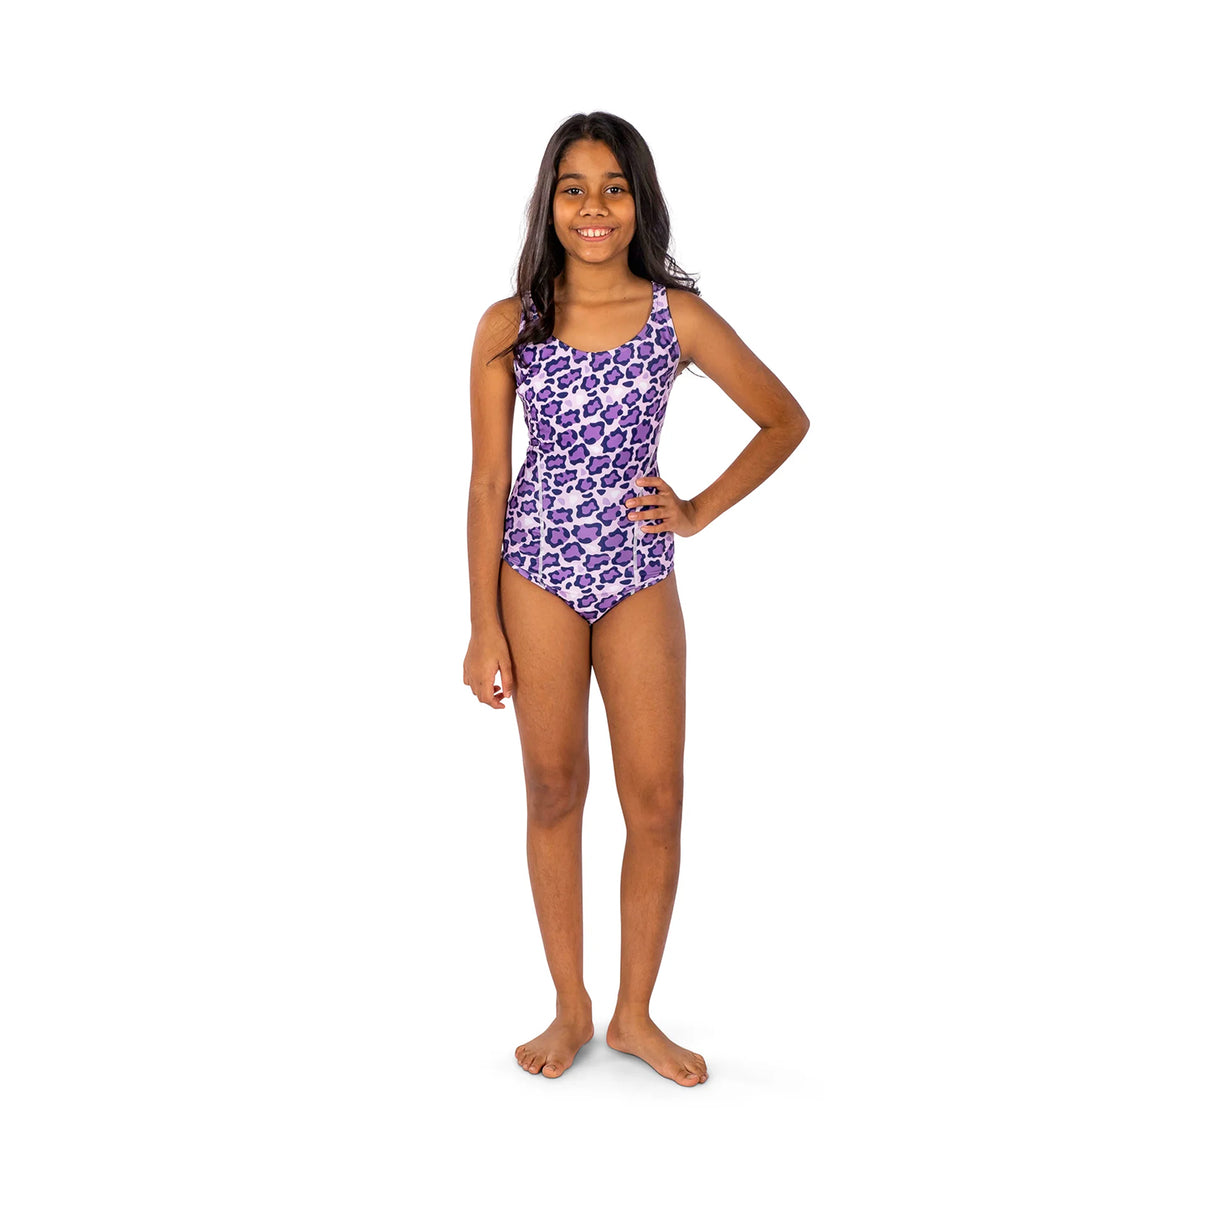 COEGA Girls Youth Competition Swimsuit